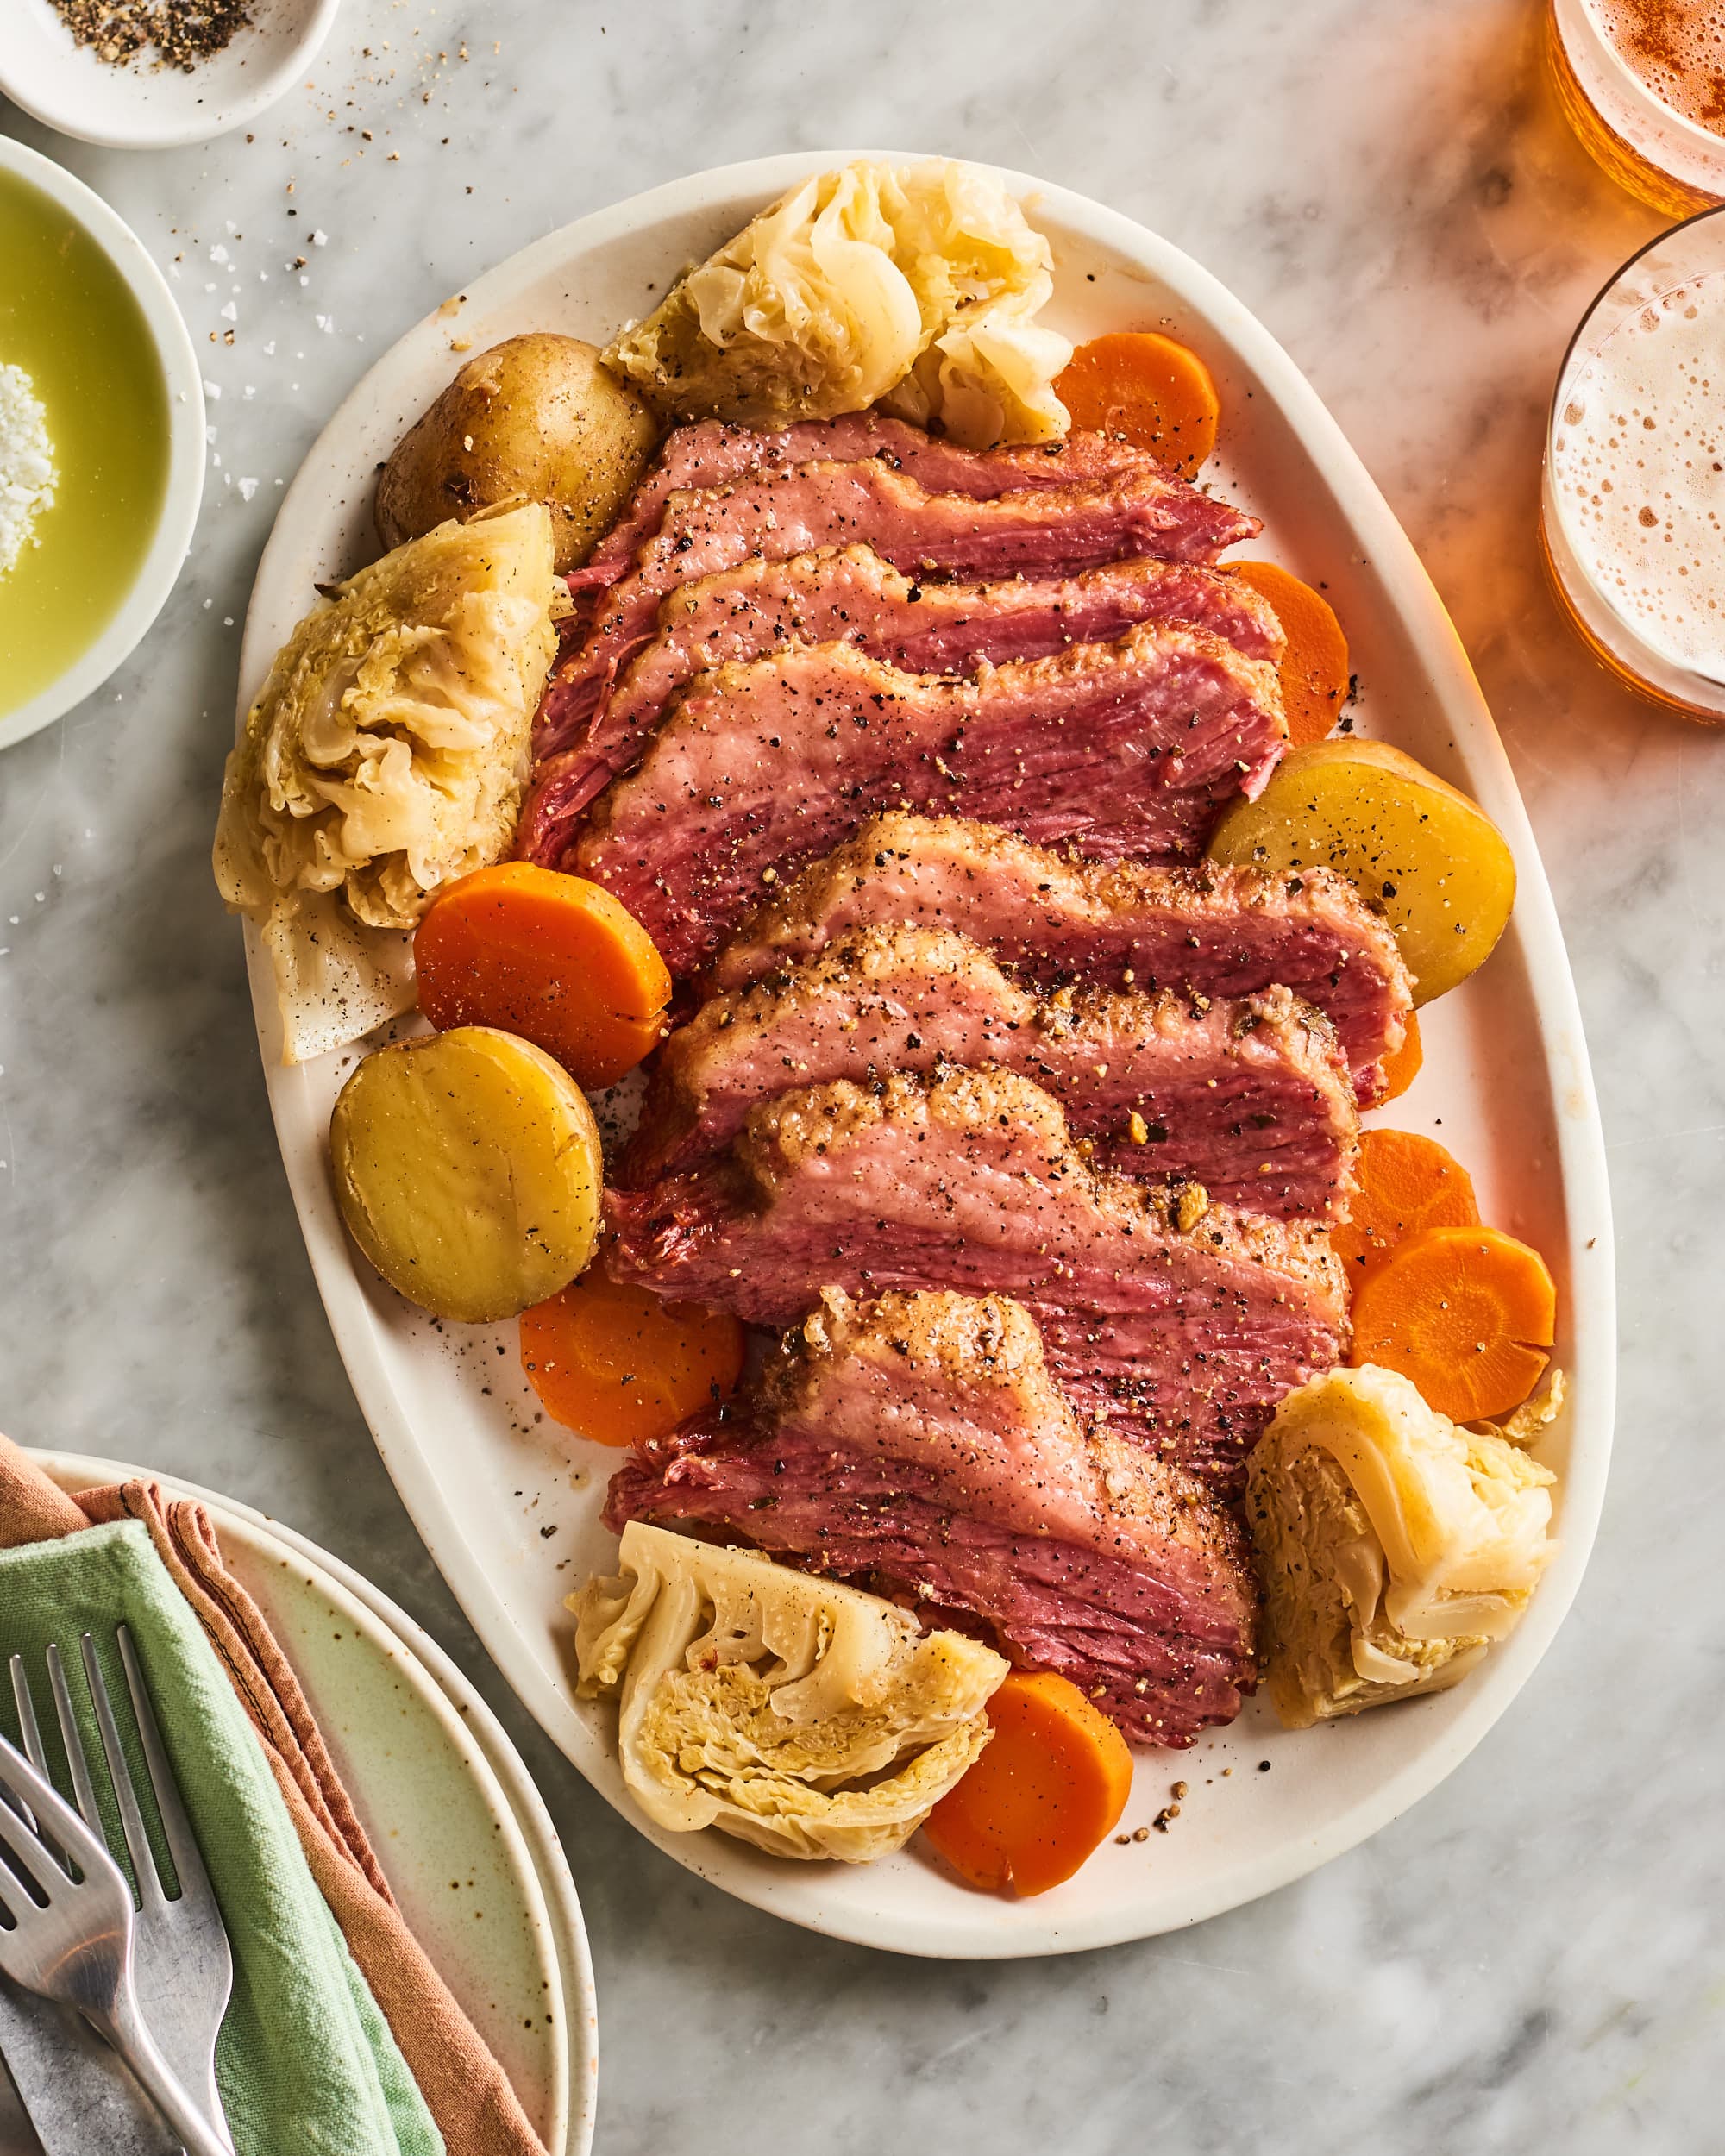 How To Make Instant Pot Corned Beef And Cabbage Kitchn